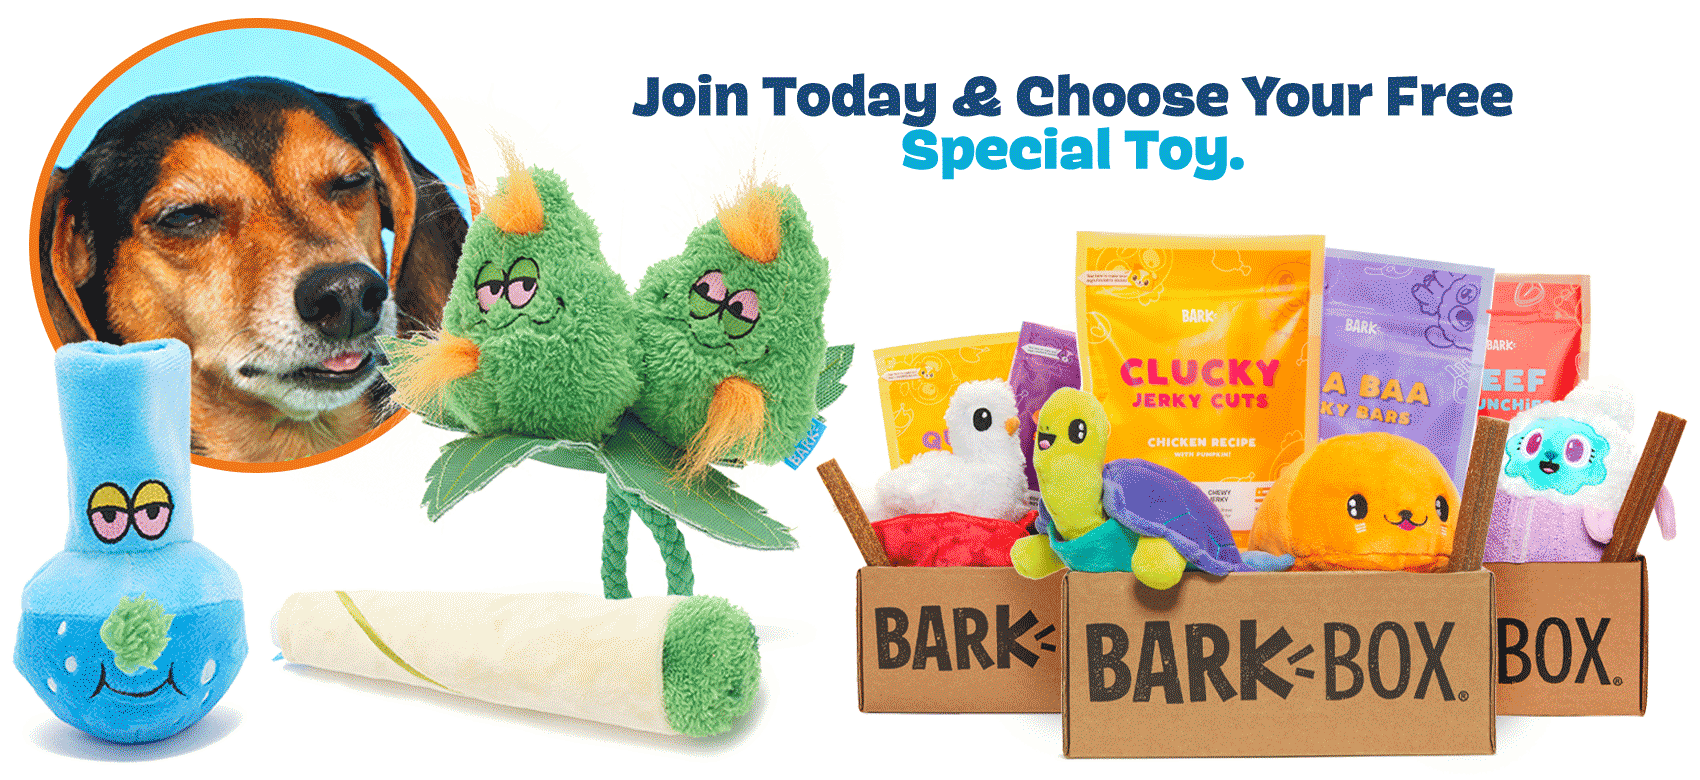 BarkBox Coupon FREE 420 Inspired Bonus Toy With Subscription! Hello